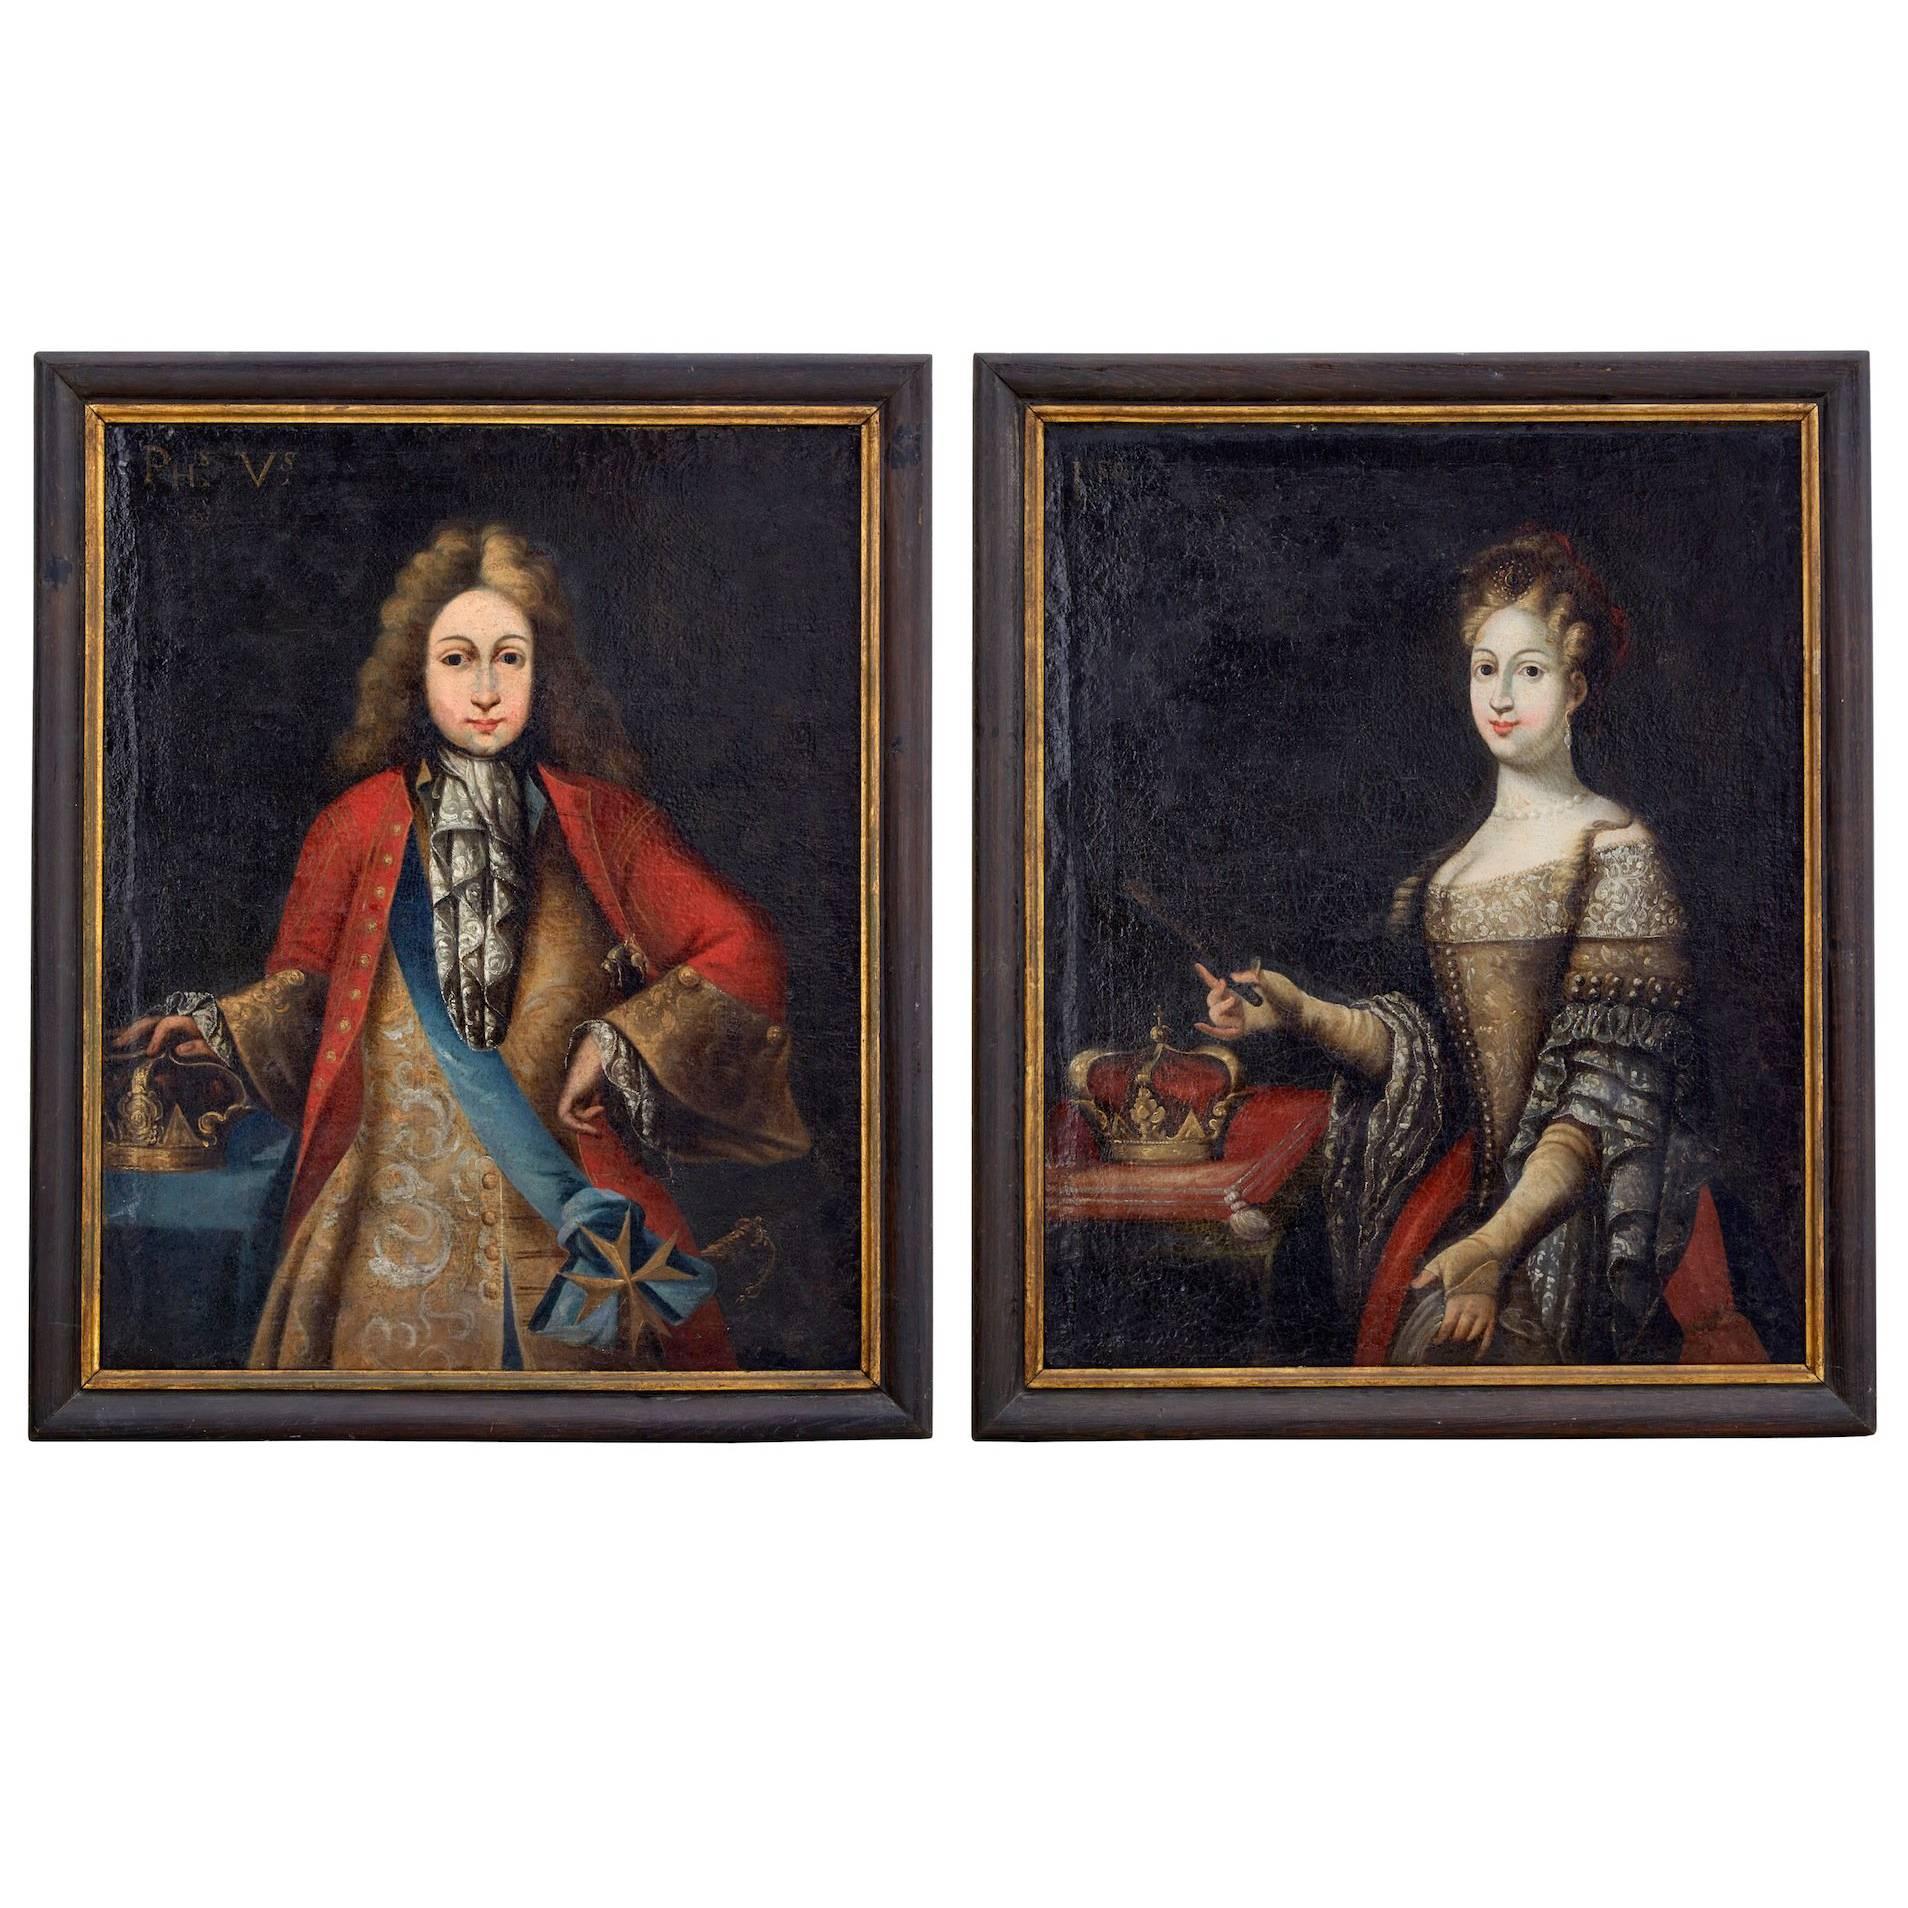 Pair of Early 18th Century Habsburg Empire Oil on Canvas Portraits